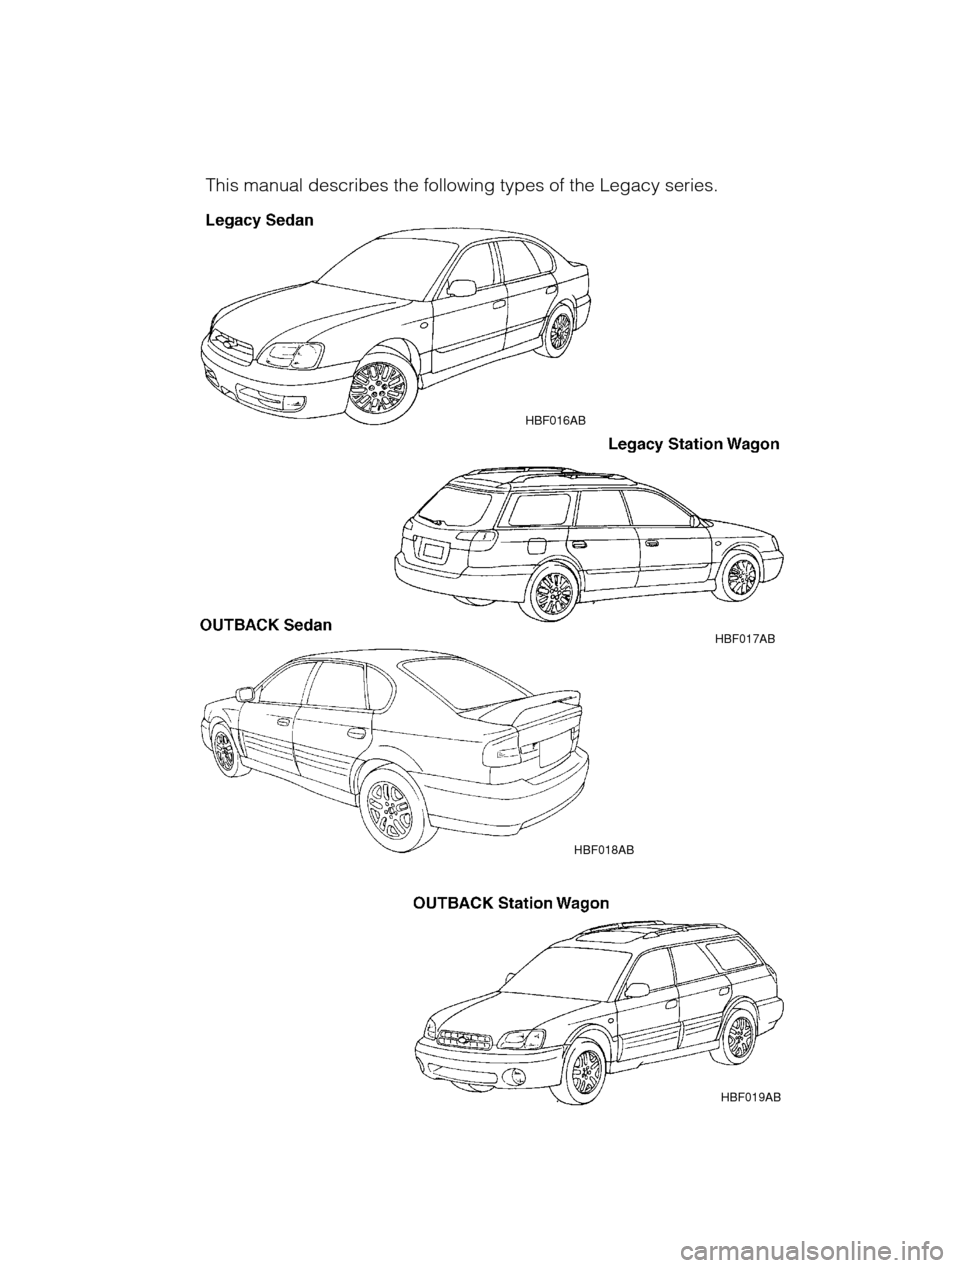 SUBARU LEGACY 2002 3.G Owners Manual HBF016ABHBF017AB
This manual describes the following types of the Legacy series.
HBF019AB
HBF018AB       